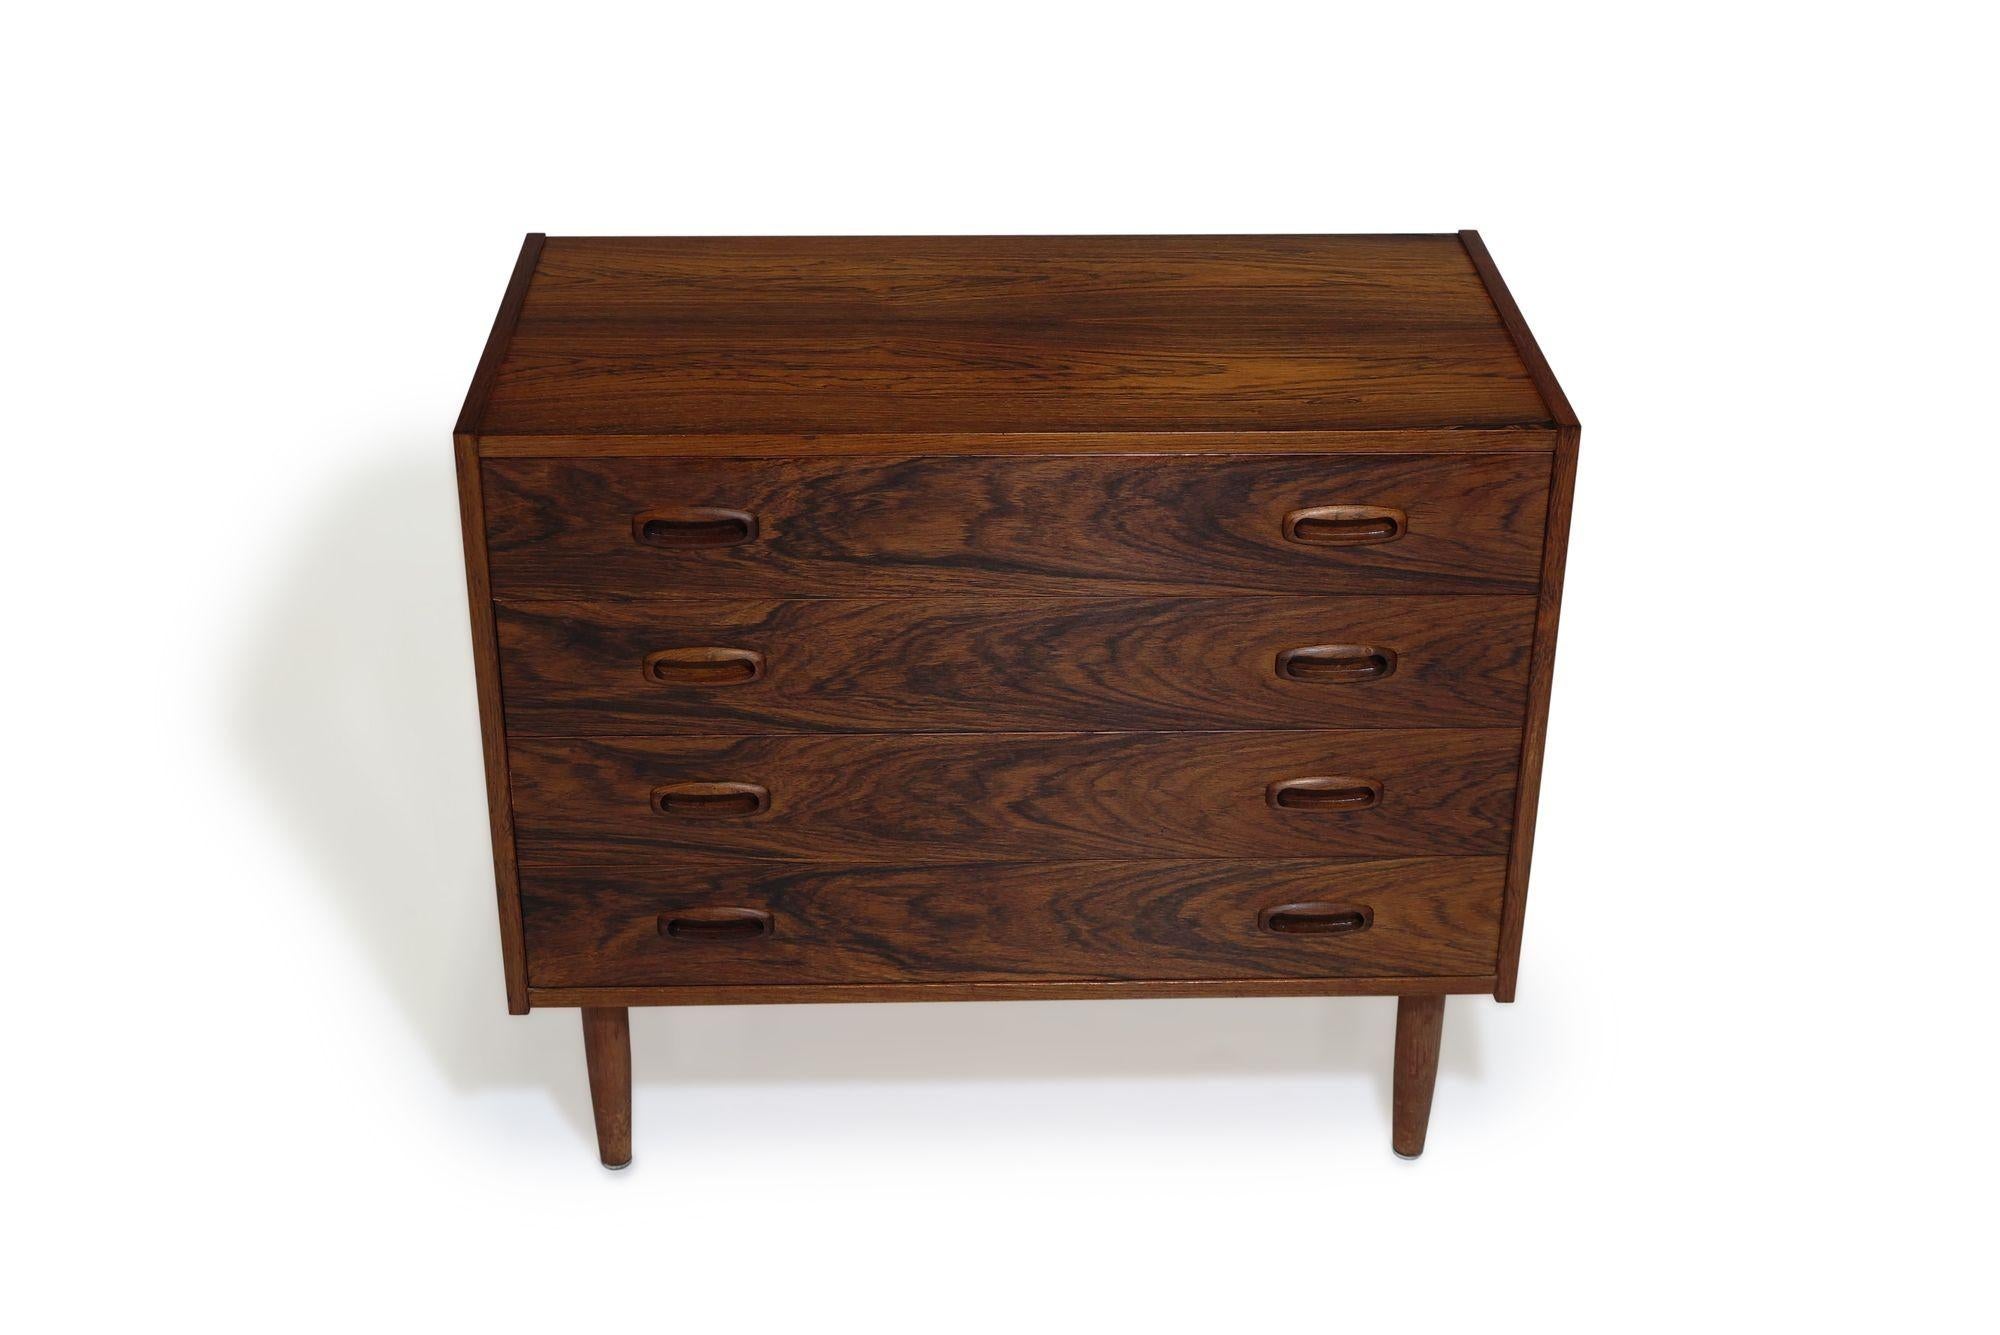 Mid-century Danish Rosewood Dresser or Nightstand In Excellent Condition For Sale In Oakland, CA